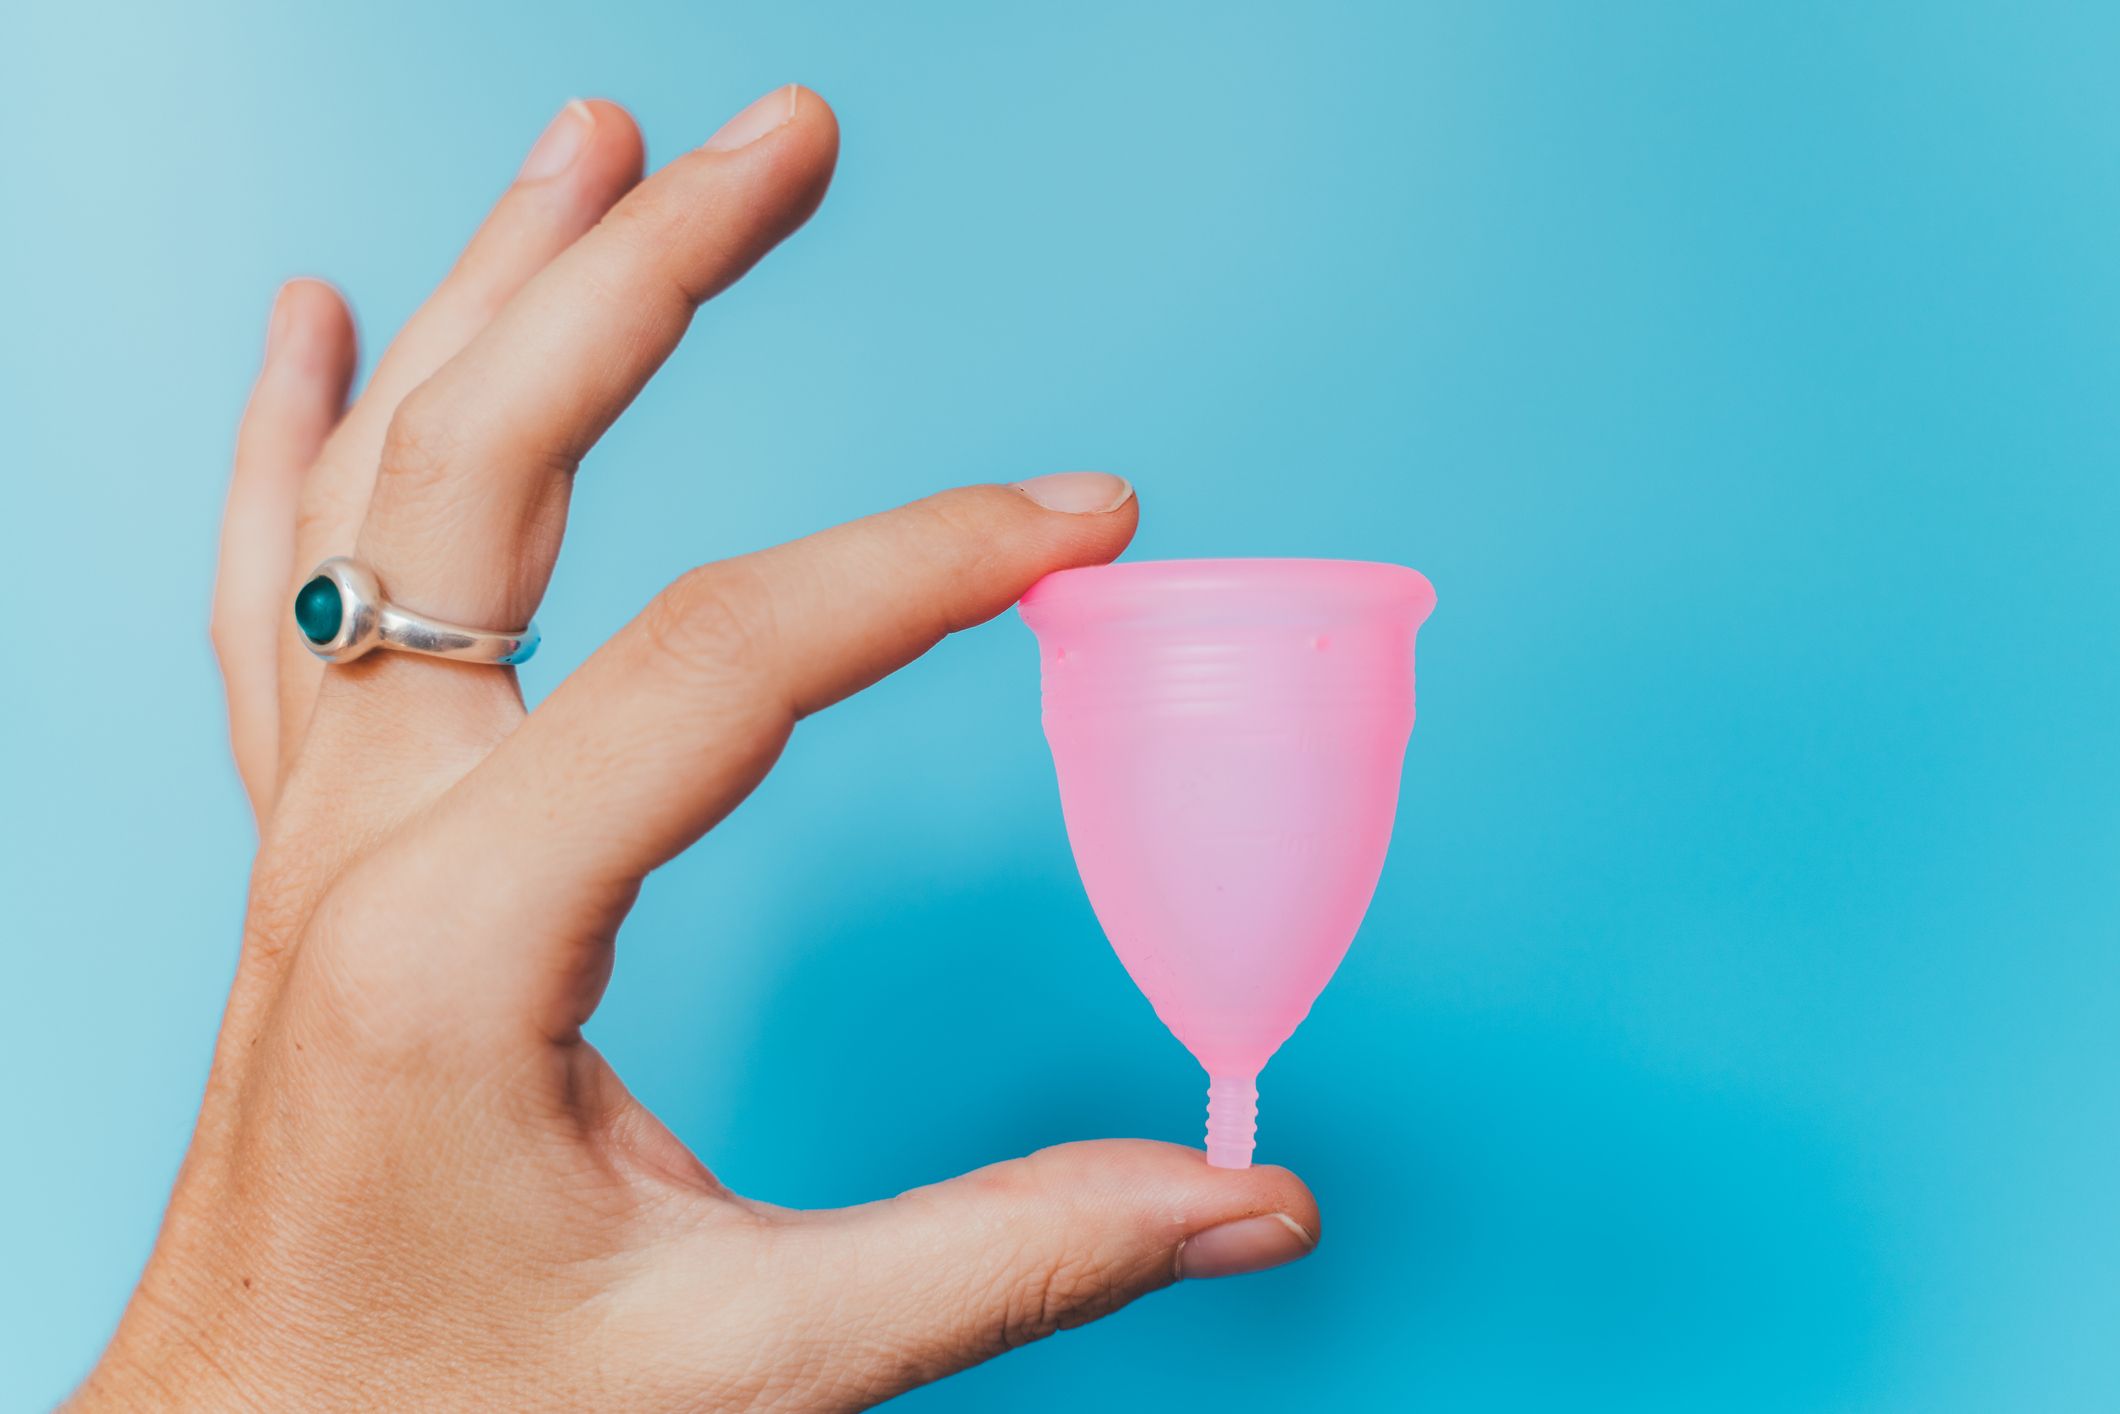 Healthshine Reusable Menstrual Cup (Large) - Cureka - Online Health Care  Products Shop